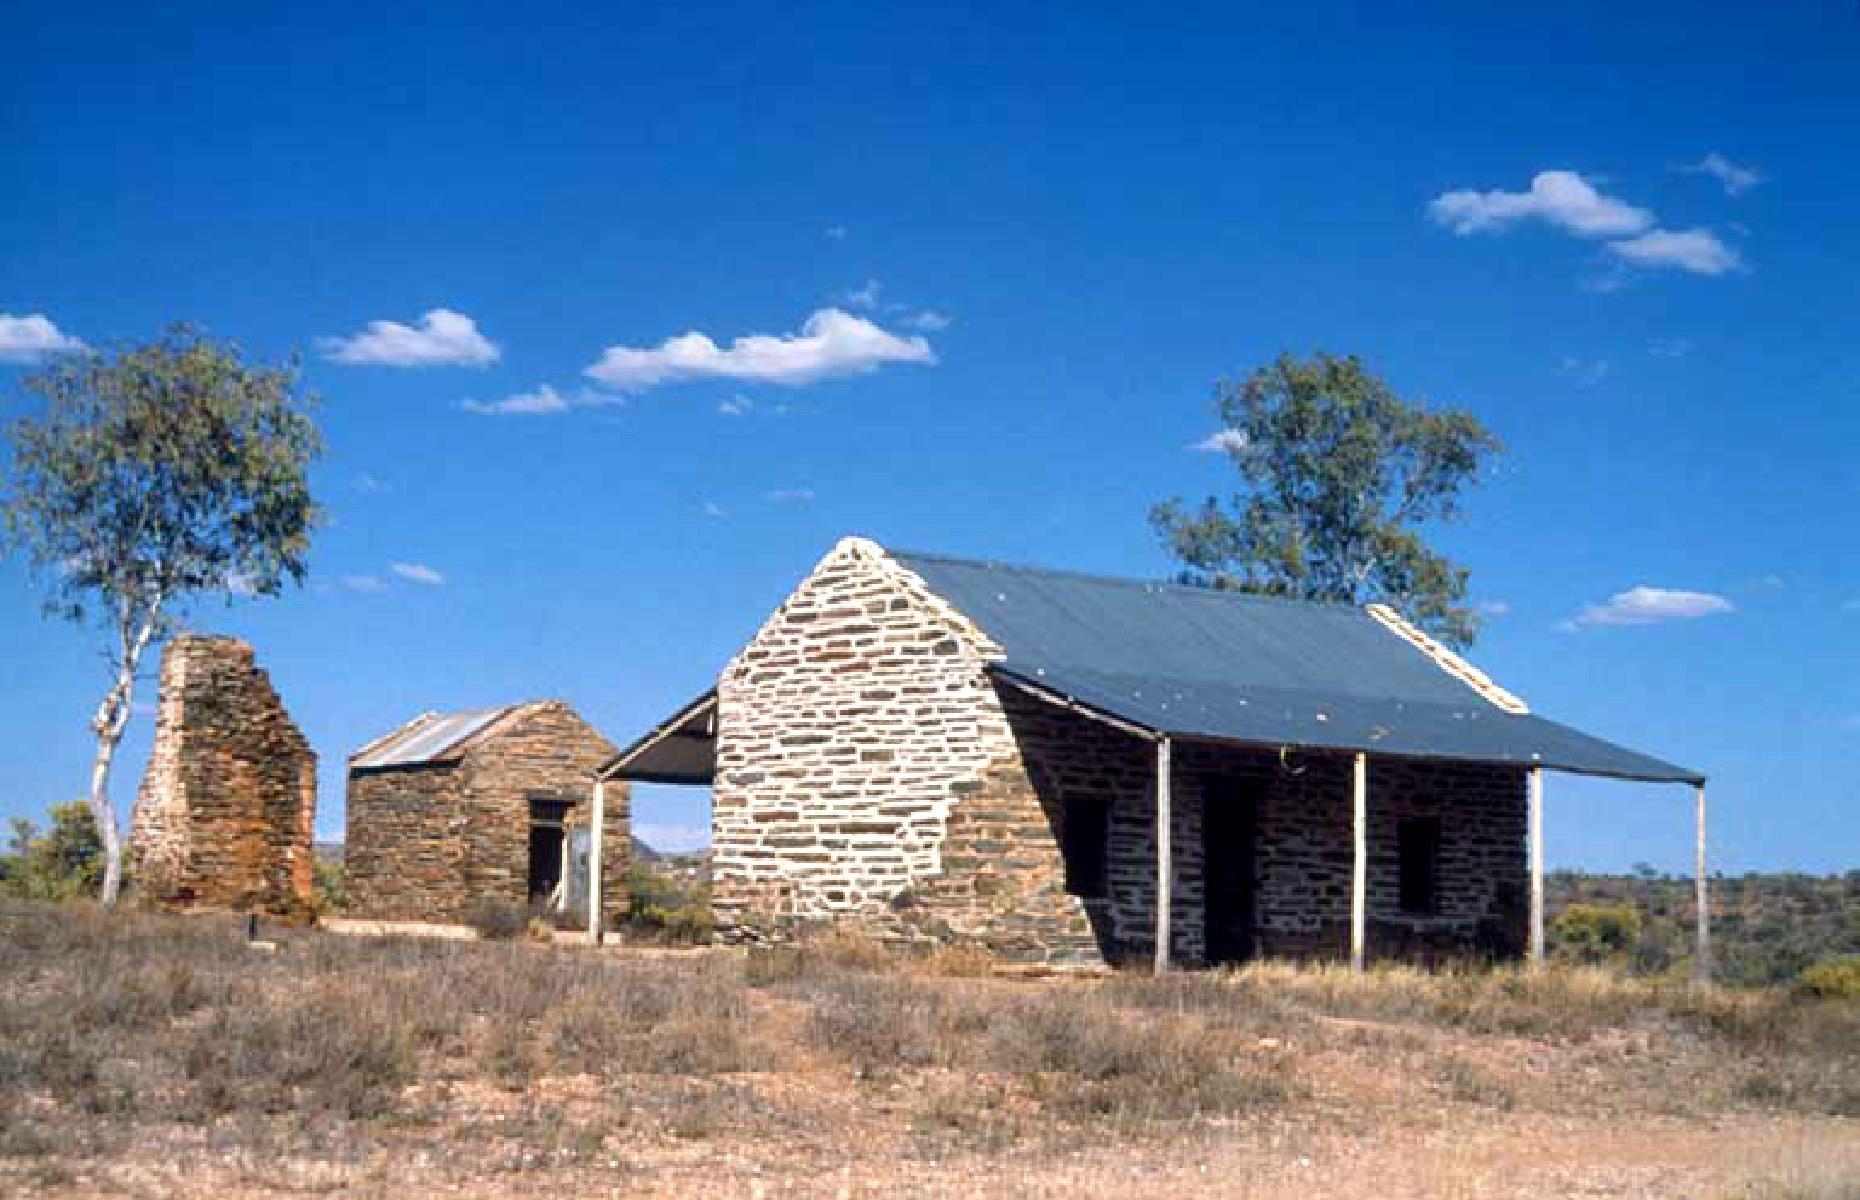 <p>A cluster of resilient stone structures lie in the 5,000-hectare Arltunga Historical Reserve, just to the east of Alice Springs in the East MacDonnell Ranges. They are the long-deserted remnants of the first European settlement in Central Australia, originally established by miners who came to look for gold in 1887. A few years after the area's alluvial gold had gone in 1896, a government battery and cyanide works opened. The ruins of these works remain, along with the parts of the old mines, the police station and jail.</p>